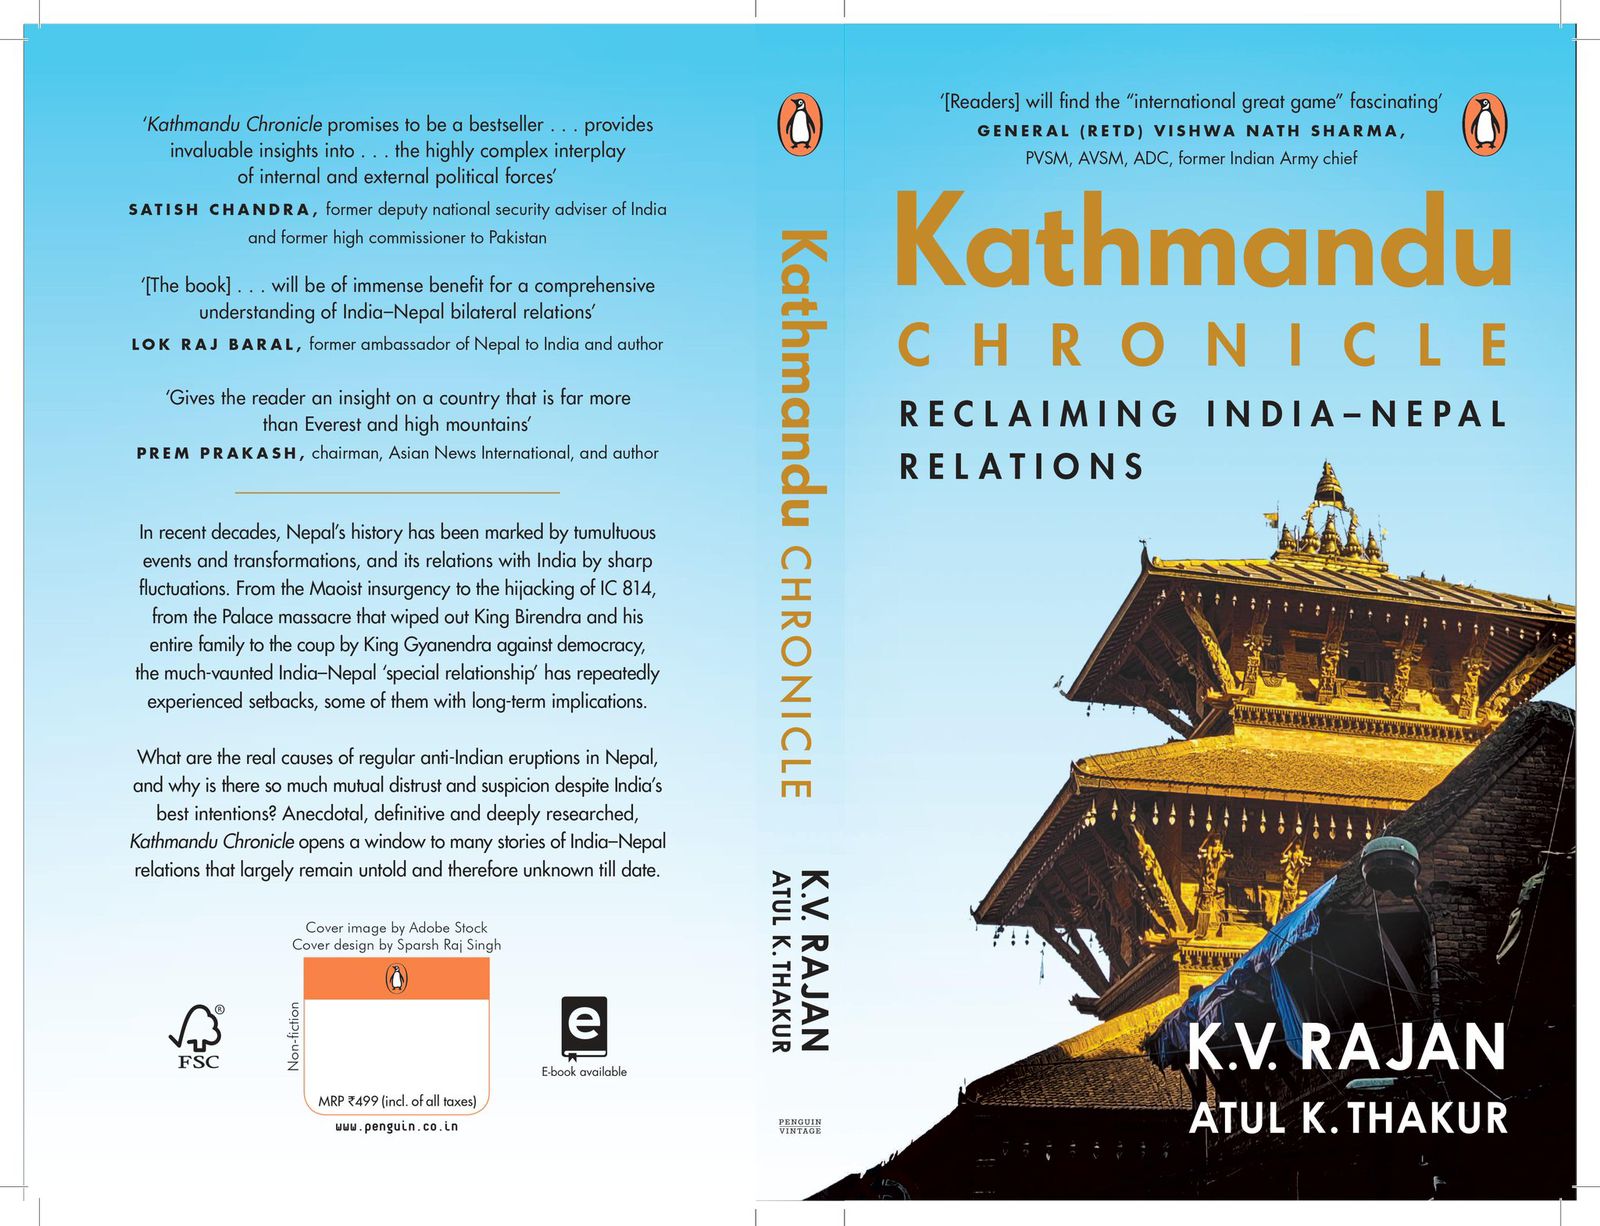 New book by Ambassador K V Rajan and Atul K Thakur explores complexities of India-Nepal relations